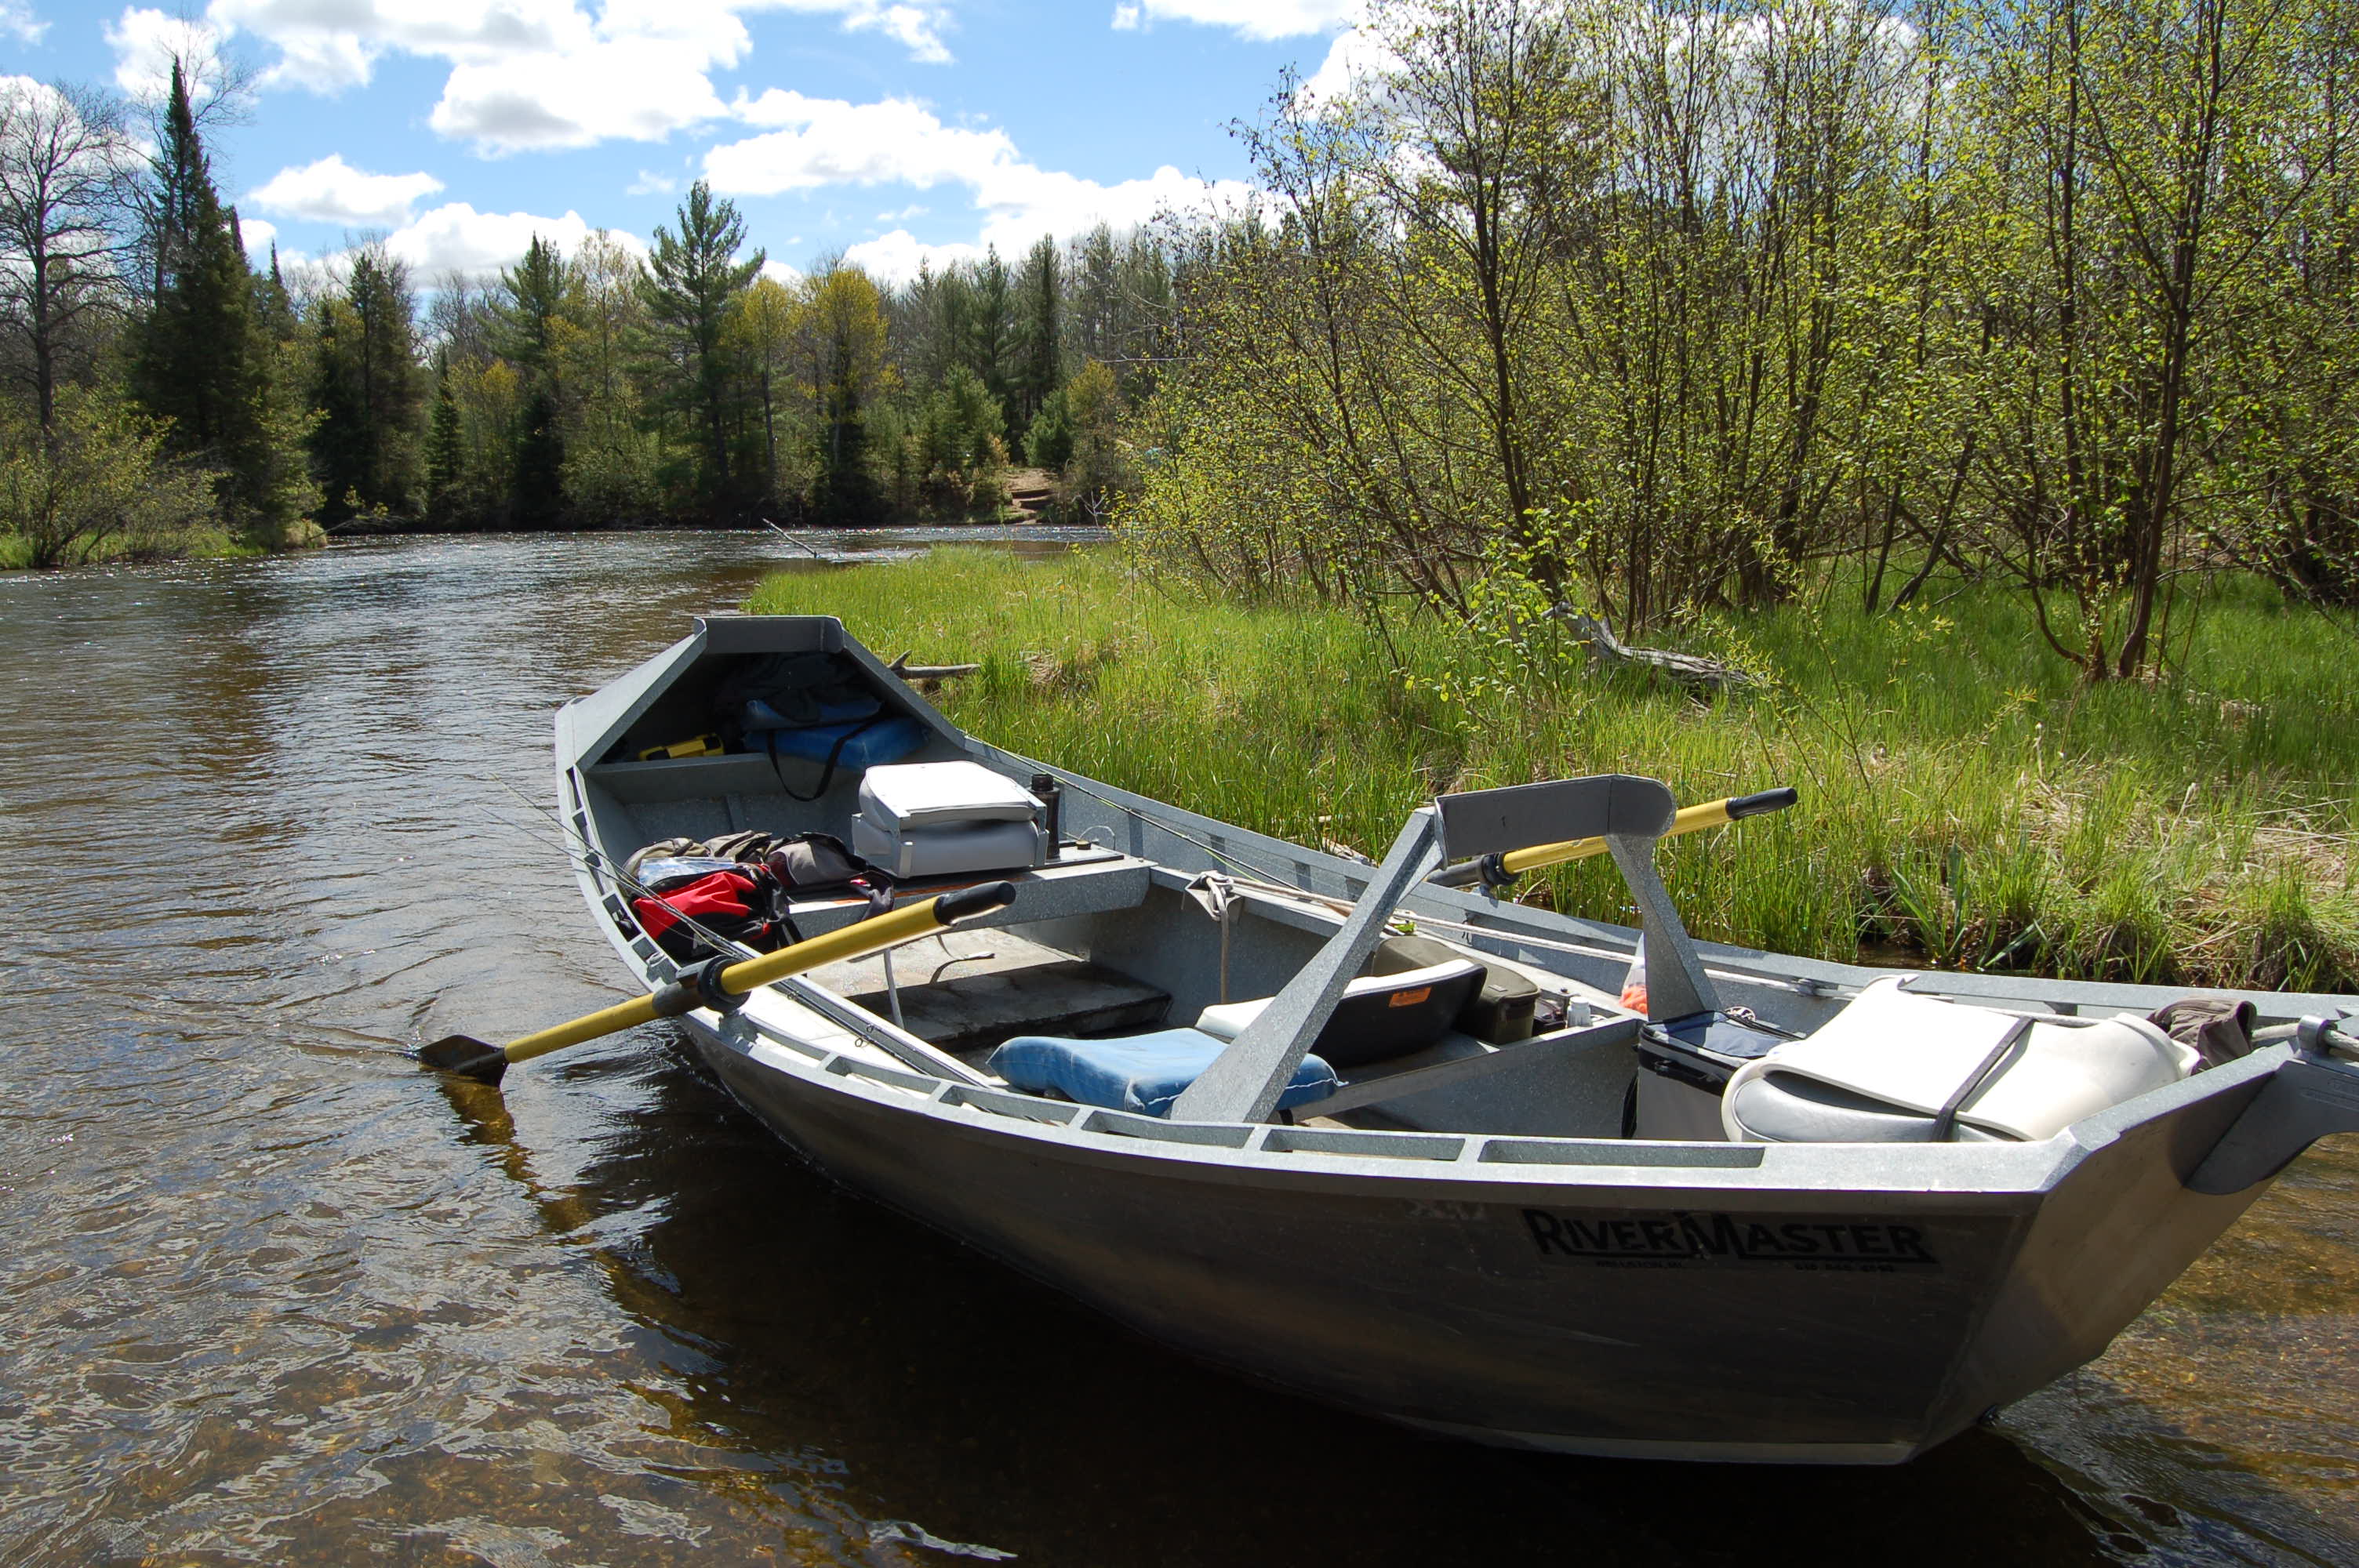 Rent a Drift Boat? Yes you can. – The Fiddle and Creel